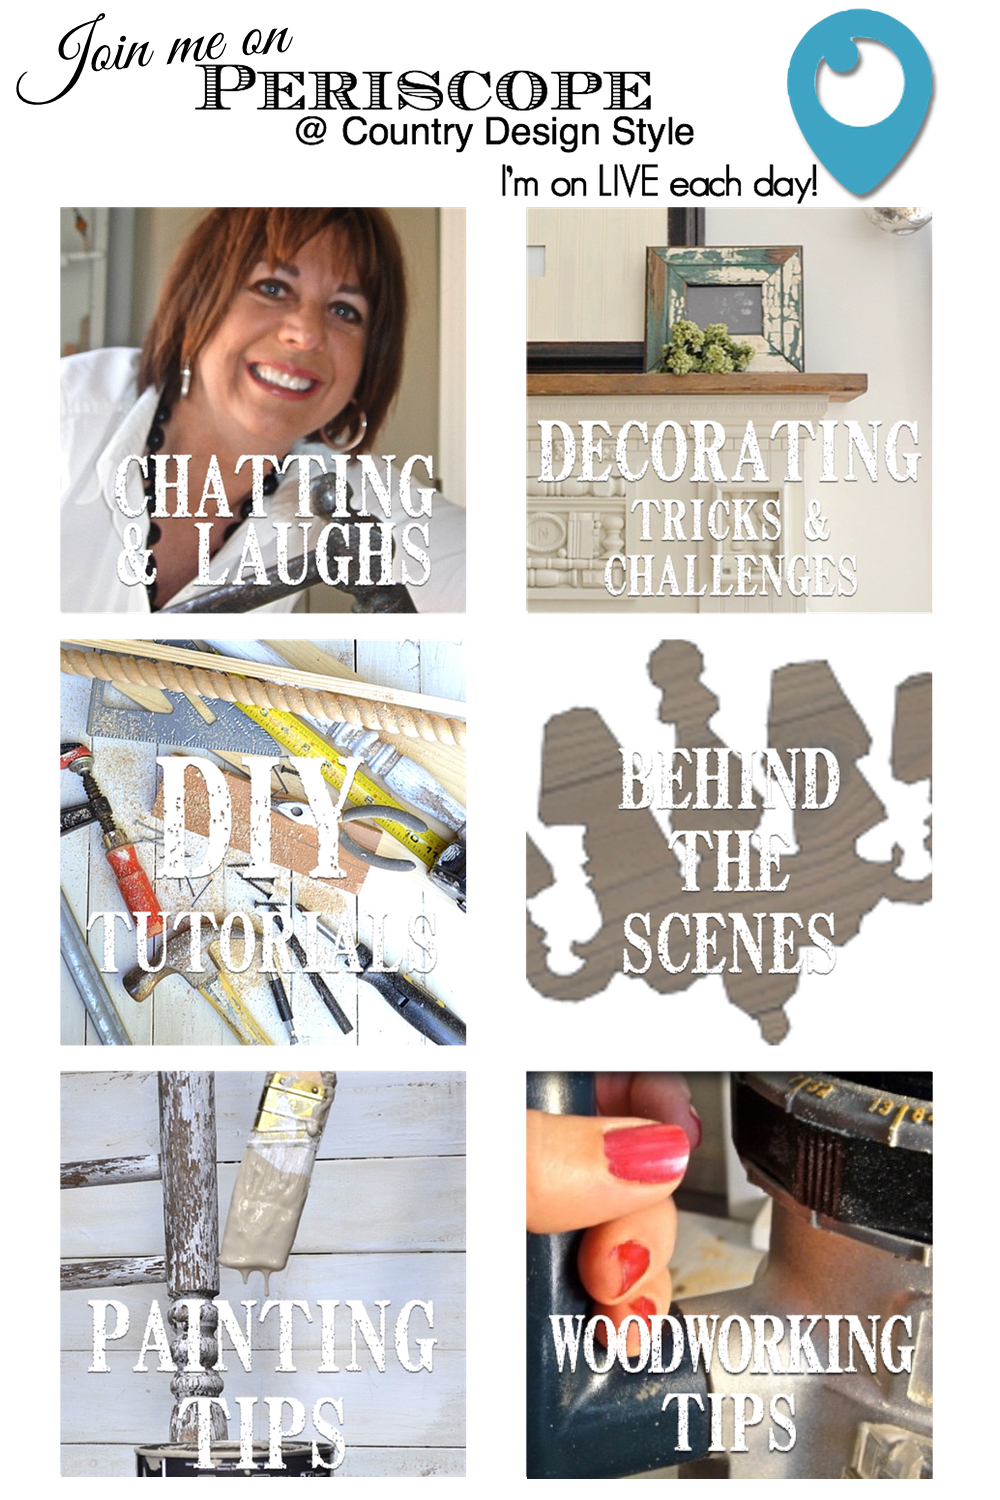 Periscope Live chats. Come join the fun and creativity live daily. Country Design Style